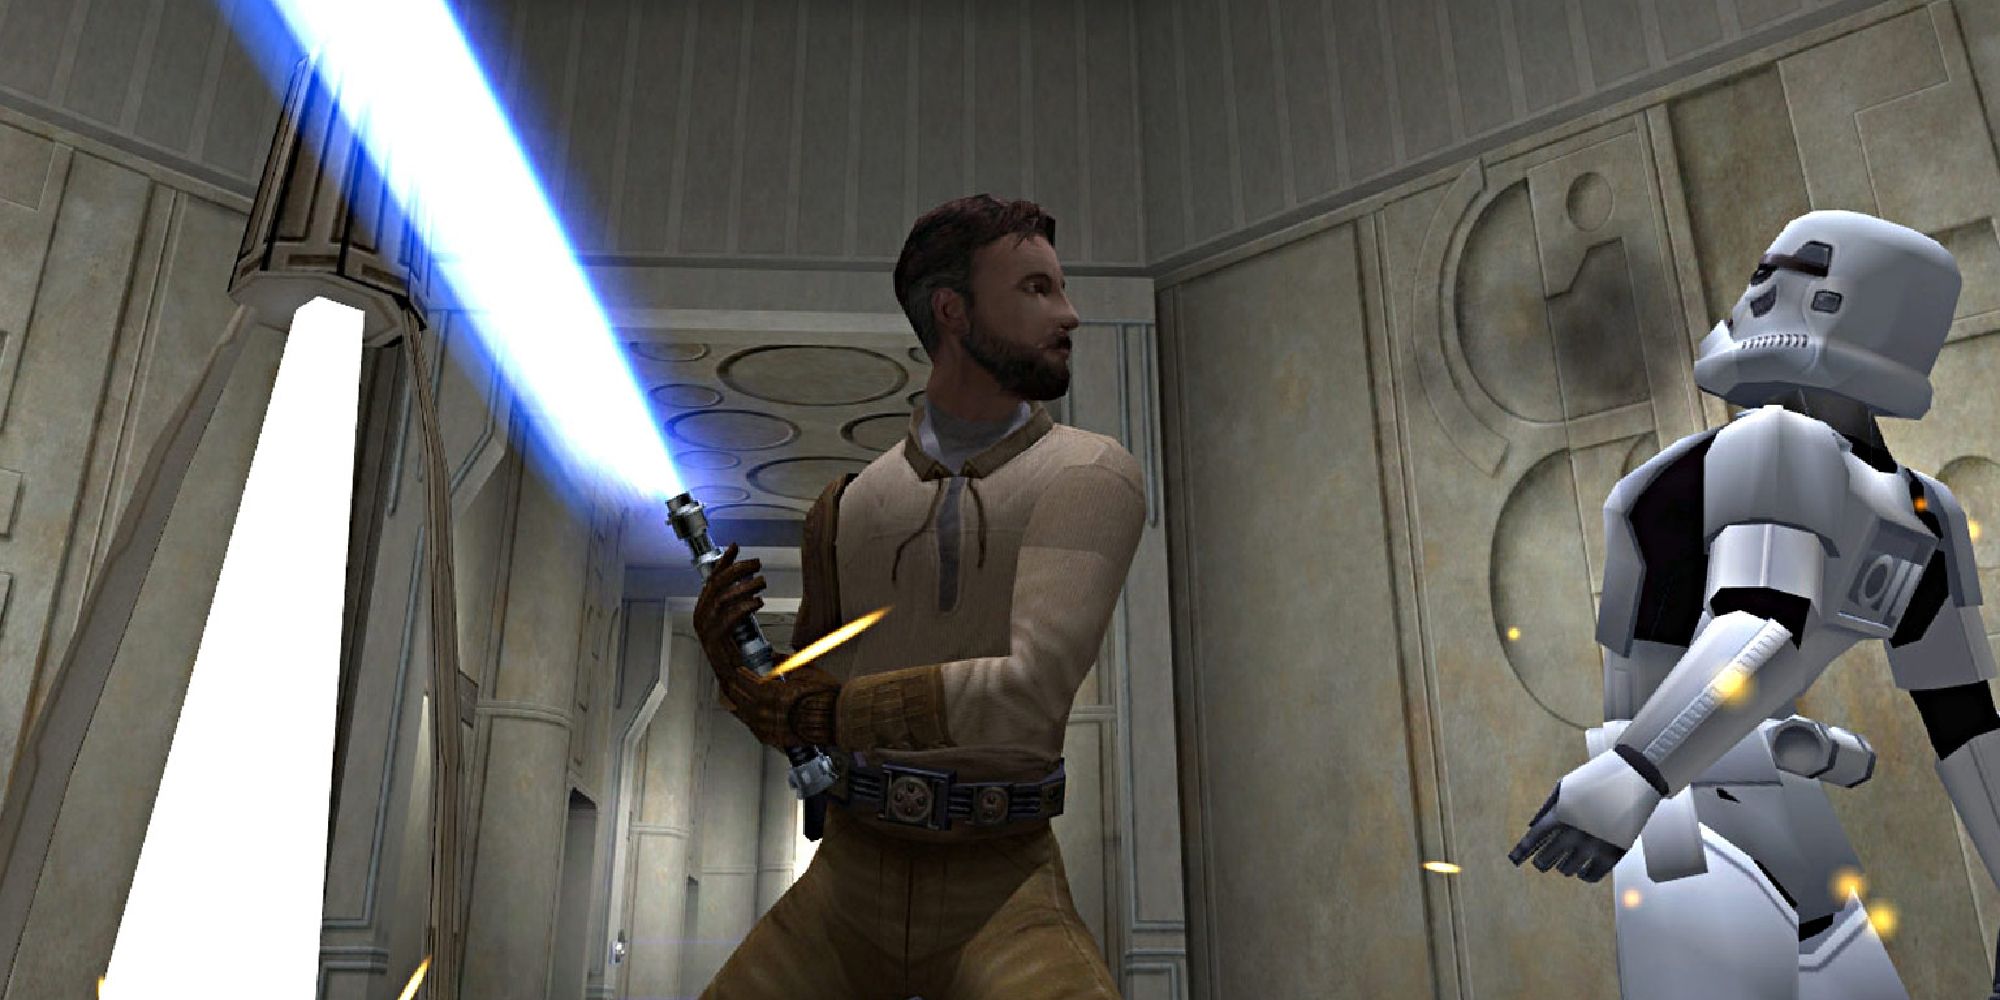 The player slashes an enemy Stormtrooper with a lightsaber in Star Wars Jedi Knight 2: Jedi Outcast.